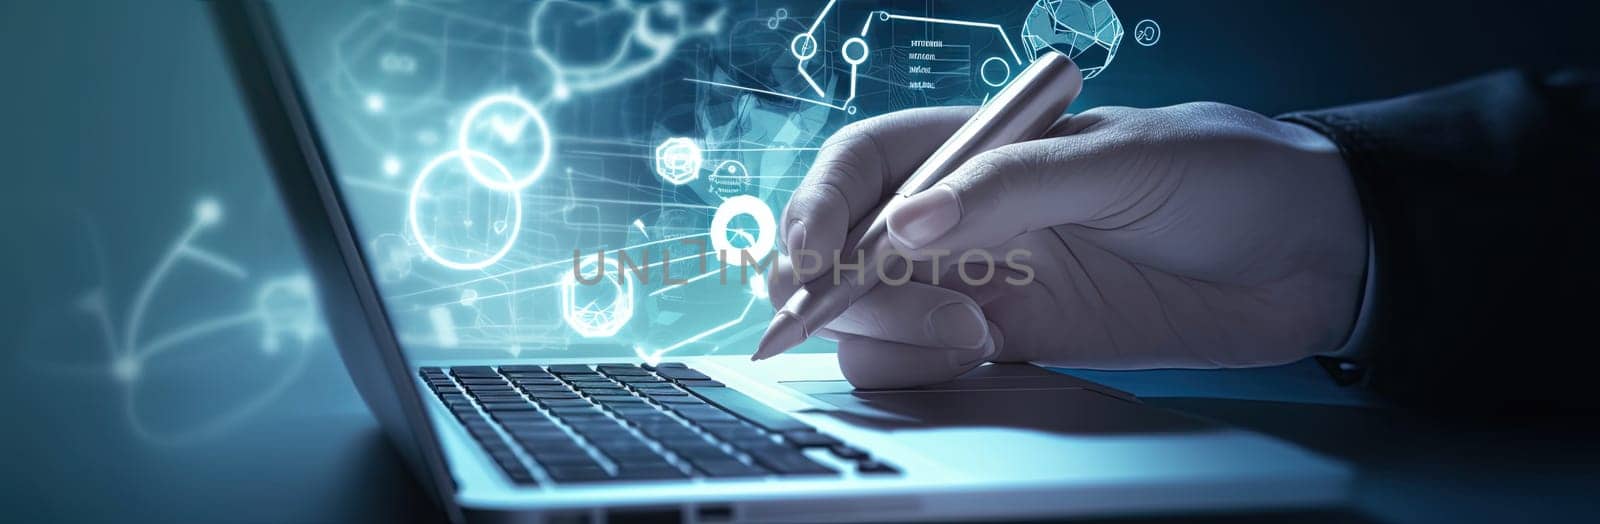 Hands typing on keyboard. Programming online database. Data processing center concept